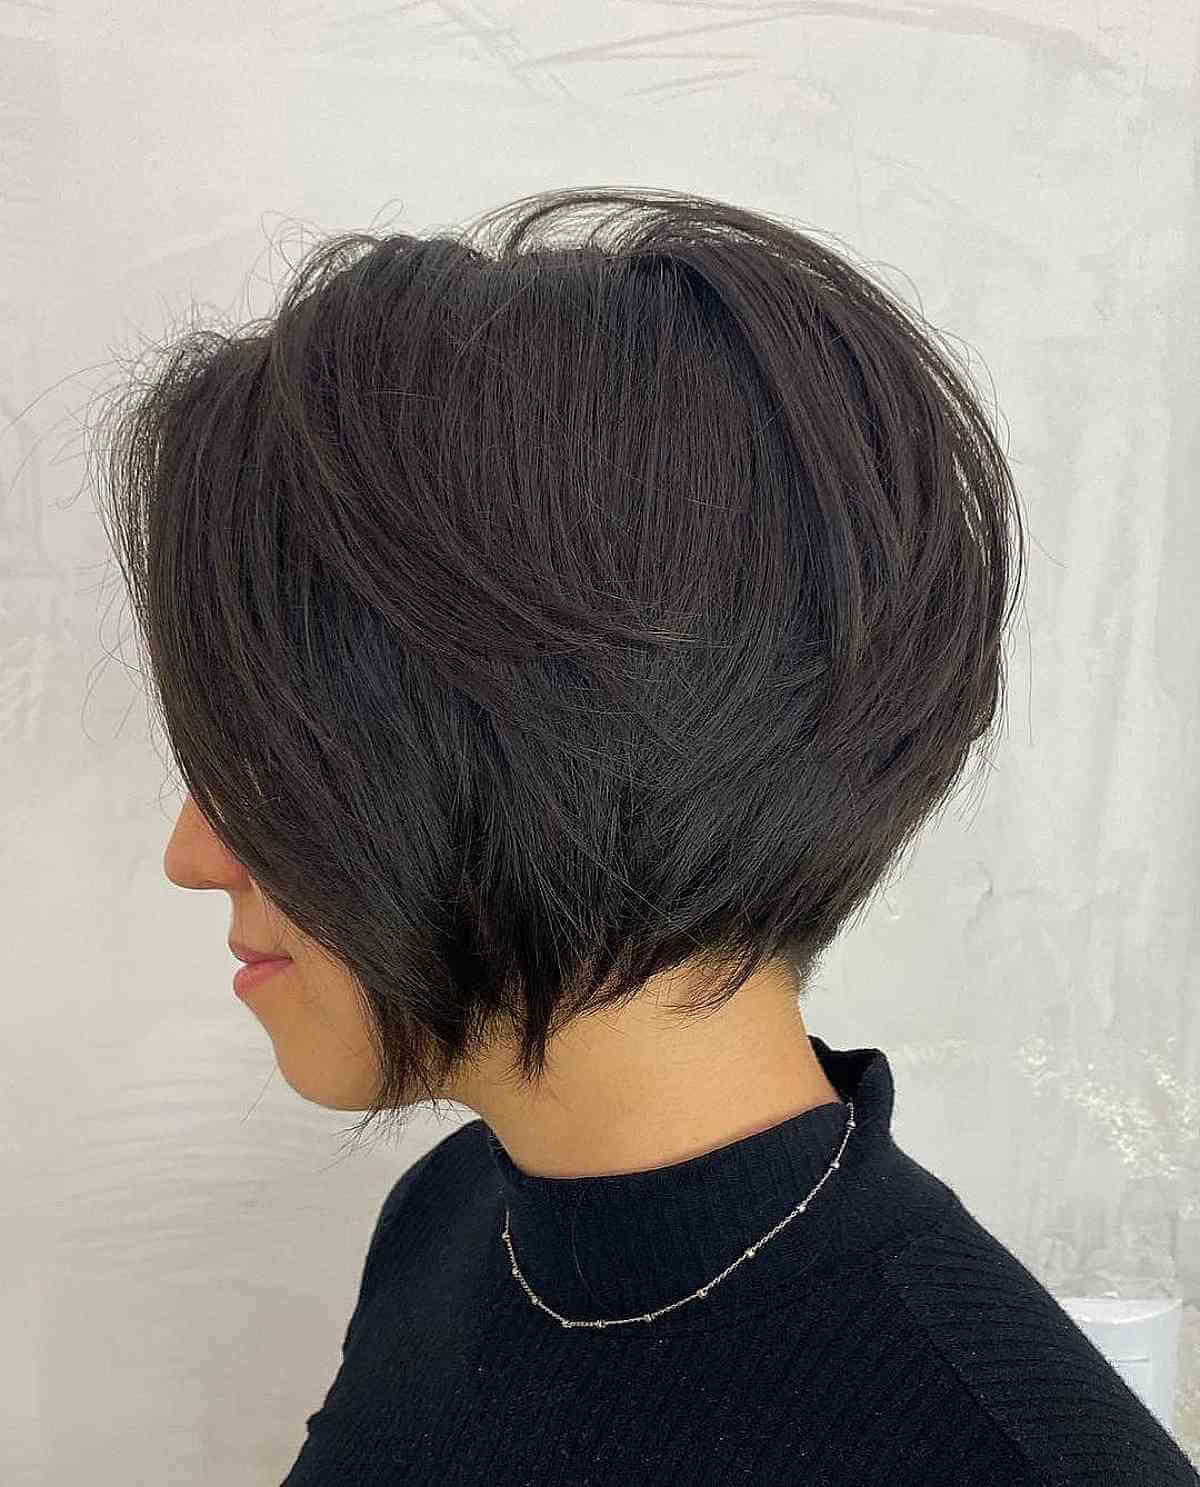 Chin-length stacked bob for thick, low-maintenance hair